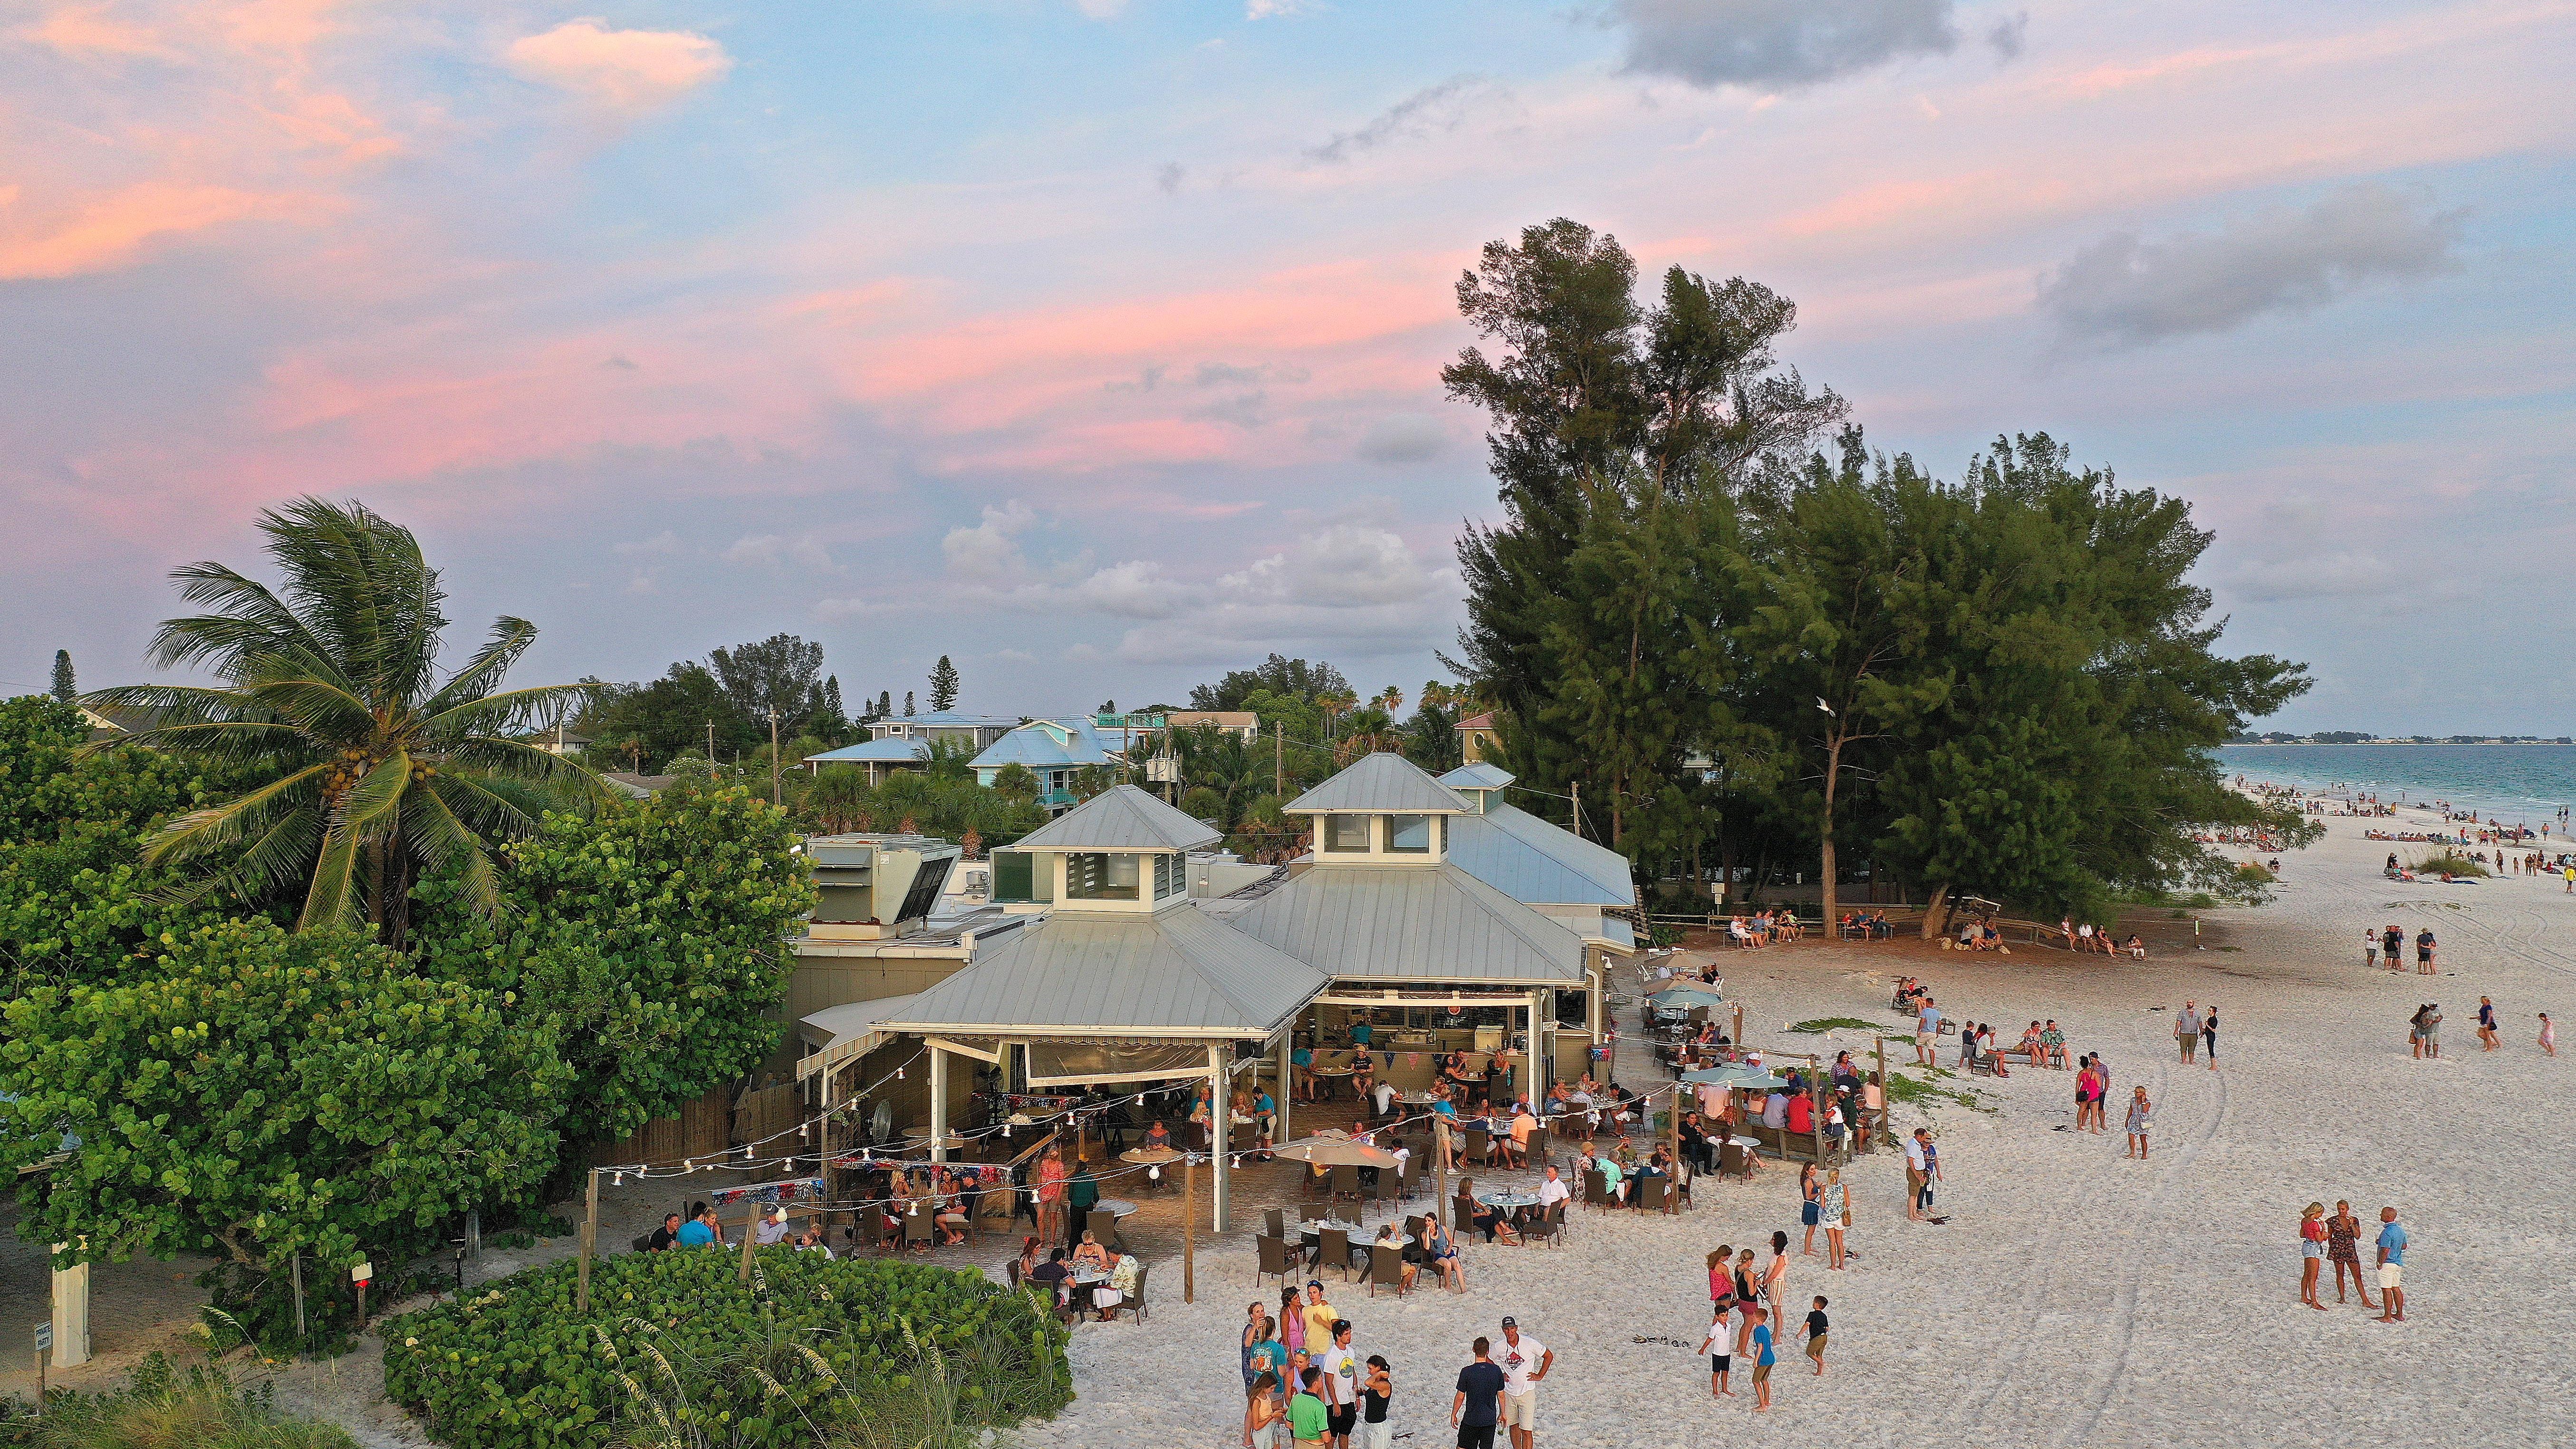 10 best waterfront restaurants for outdoor dining on Anna Maria Island